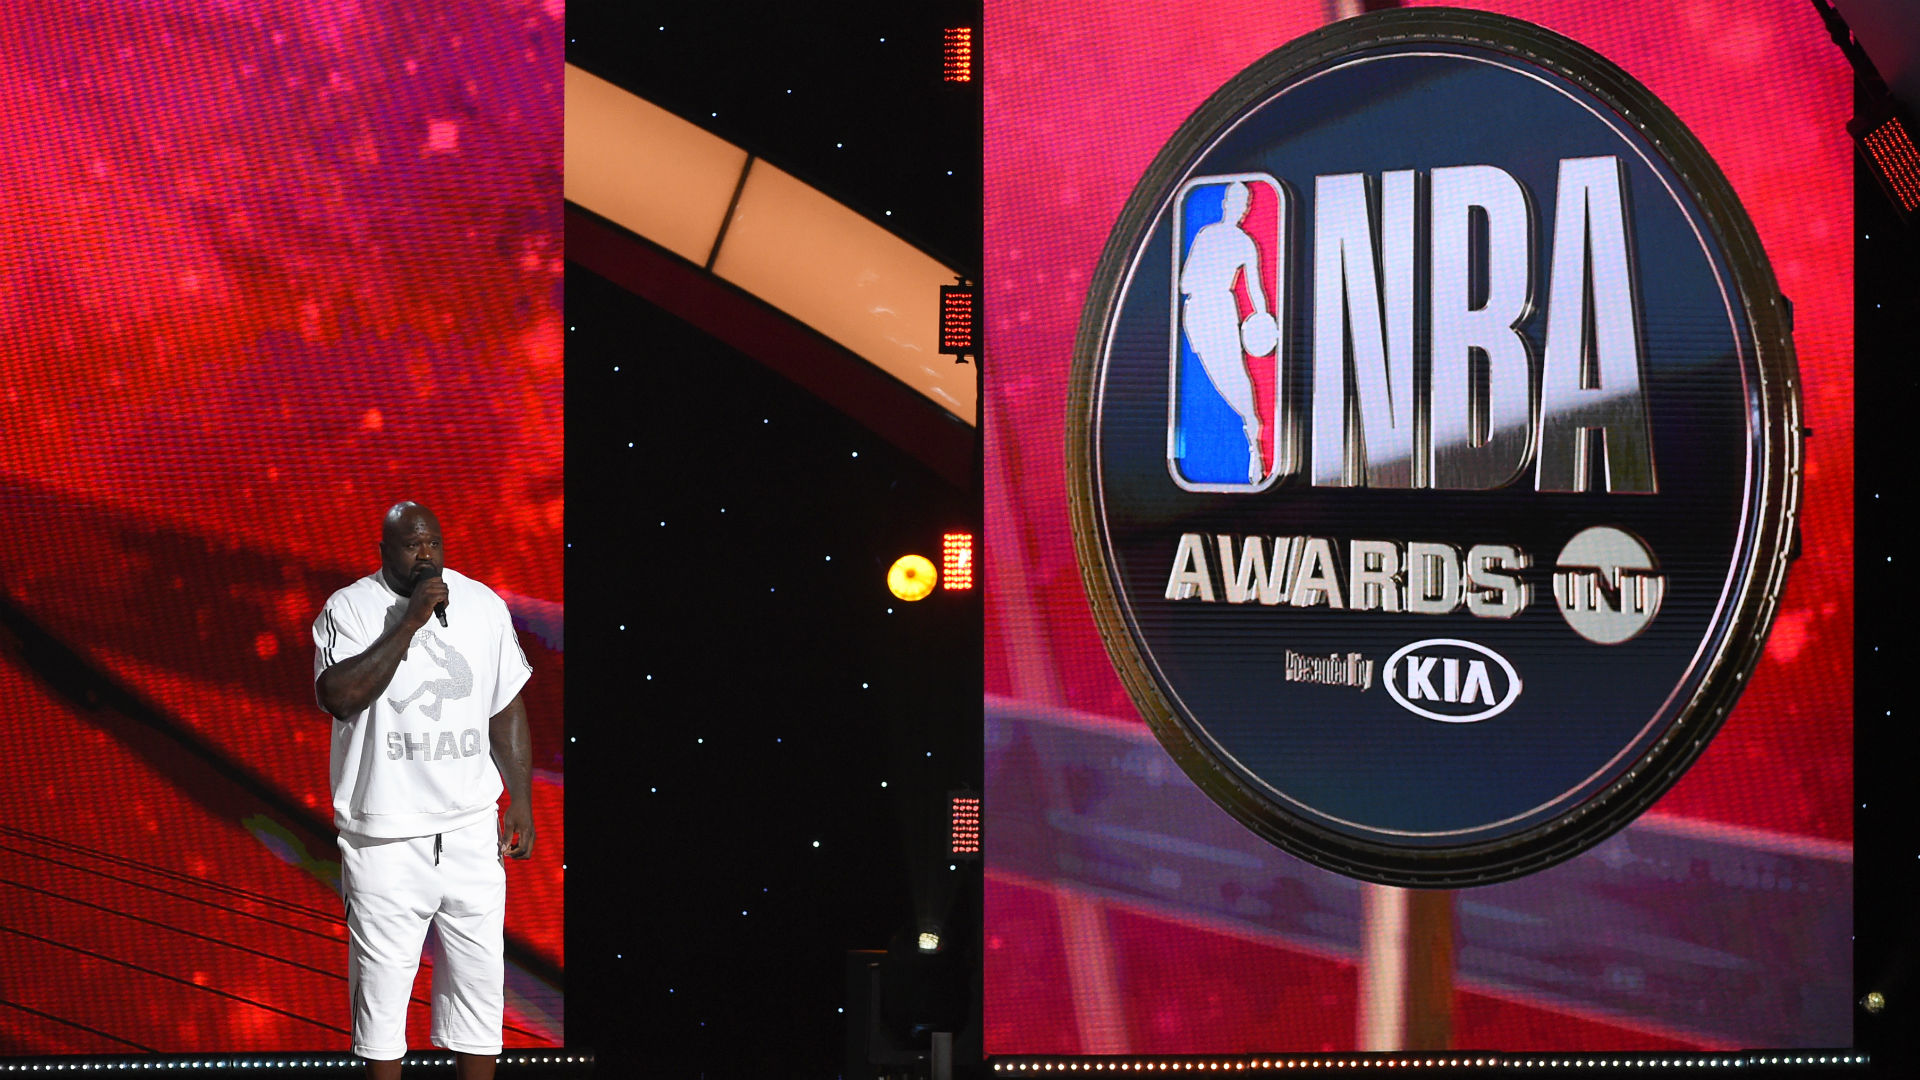 Nba Awards Live Updates Highlights Video And More From The